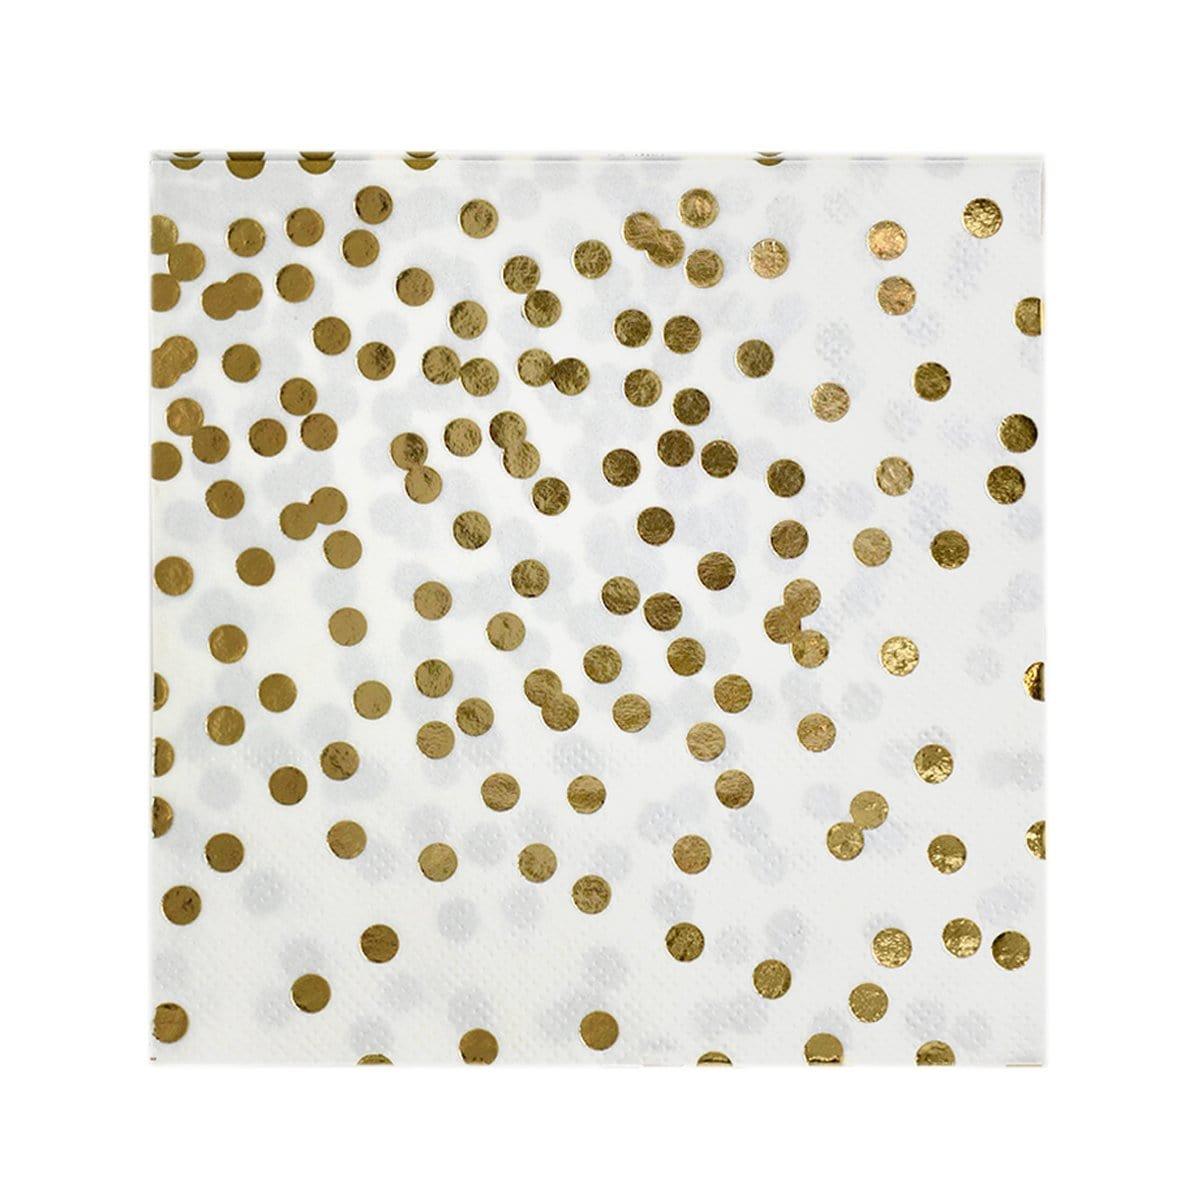 Buy Everyday Entertaining Lunch Napkins - Gold Confetti - 16/Pk sold at Party Expert